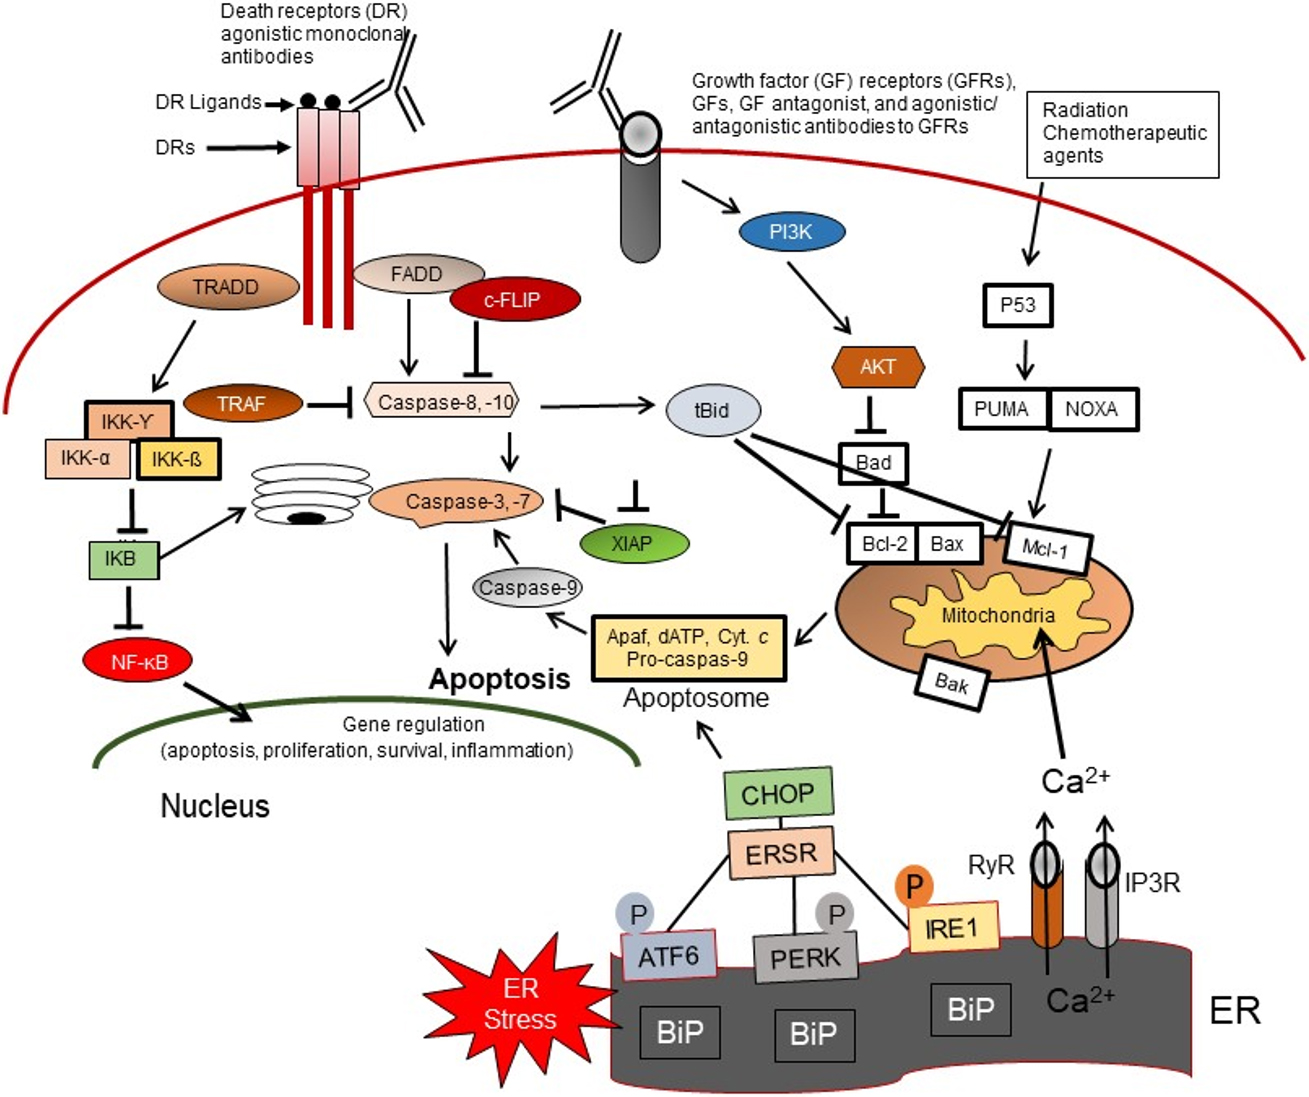 Drug and apoptosis resistance in cancer stem cells: a puzzle with 